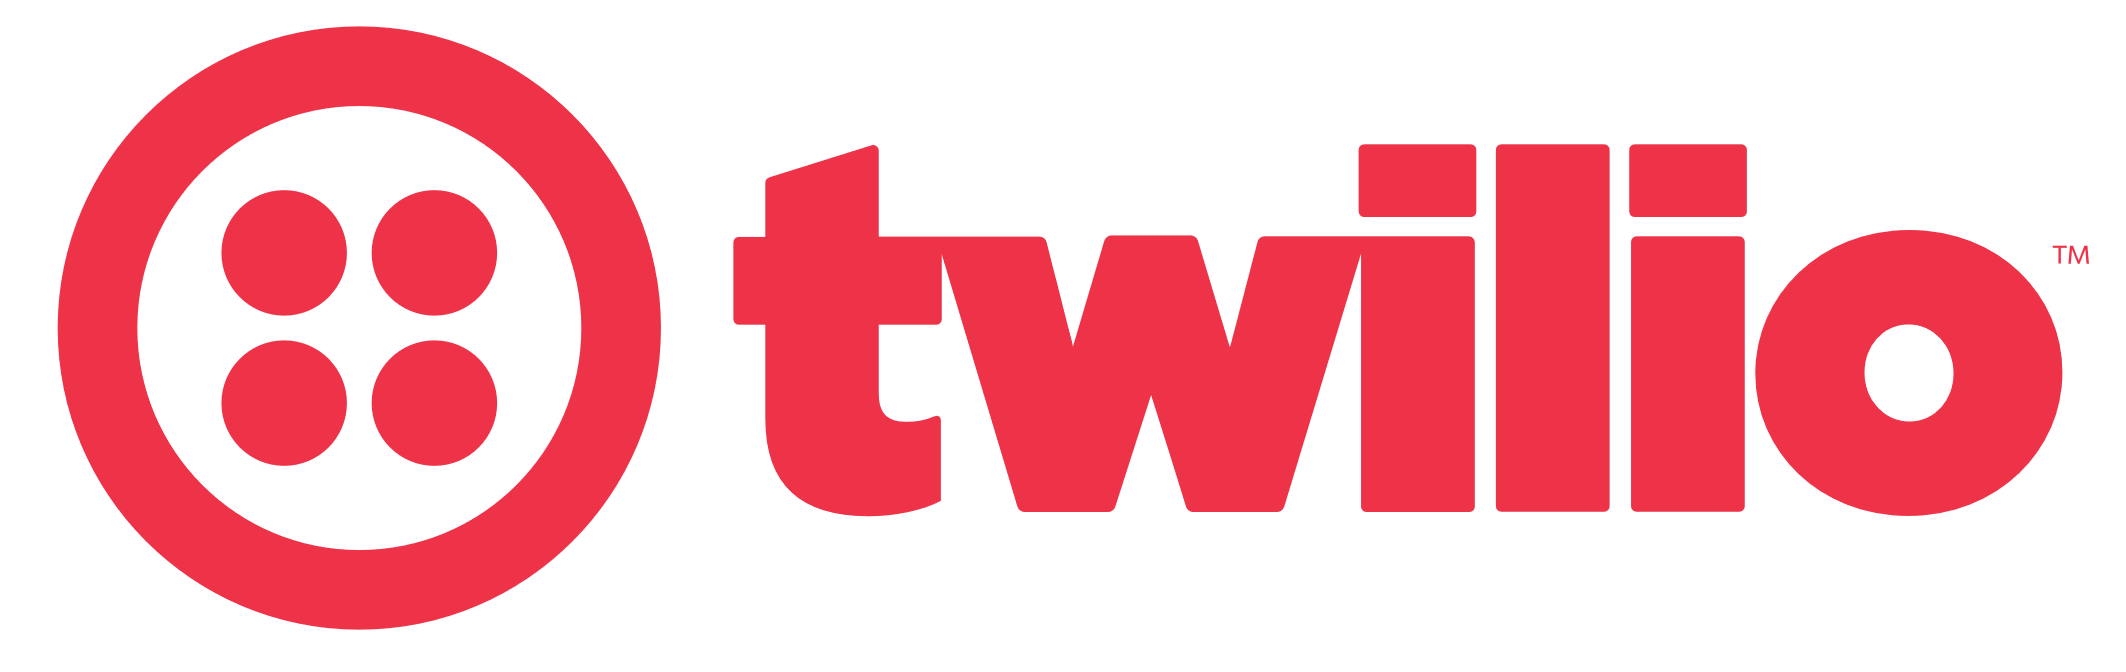 A symbol similar to a button in red with Twilio written in lower case also in red logo